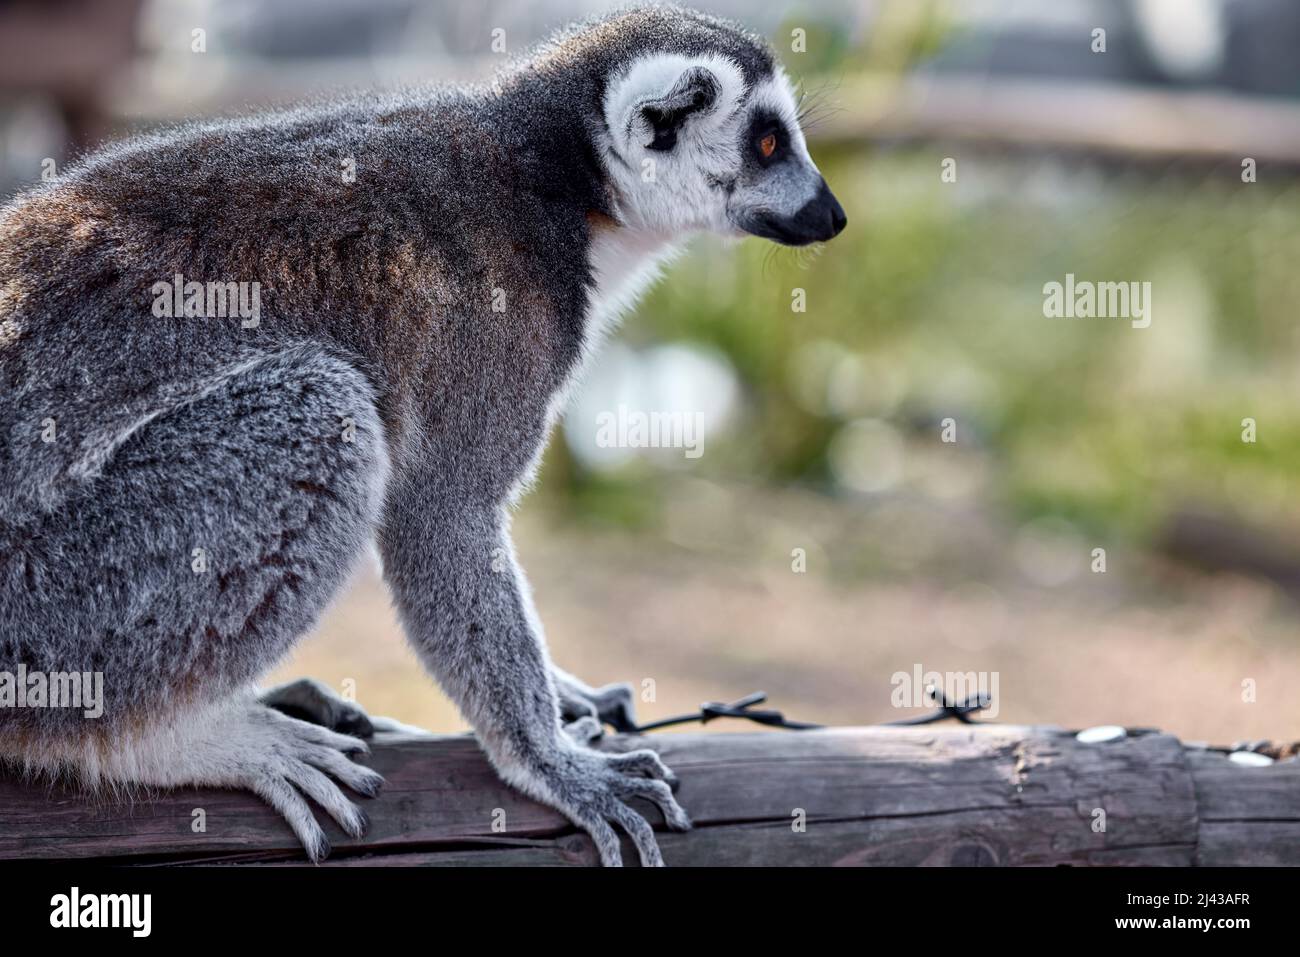 Selective focus shot of a lemur looking attentively at something Stock Photo